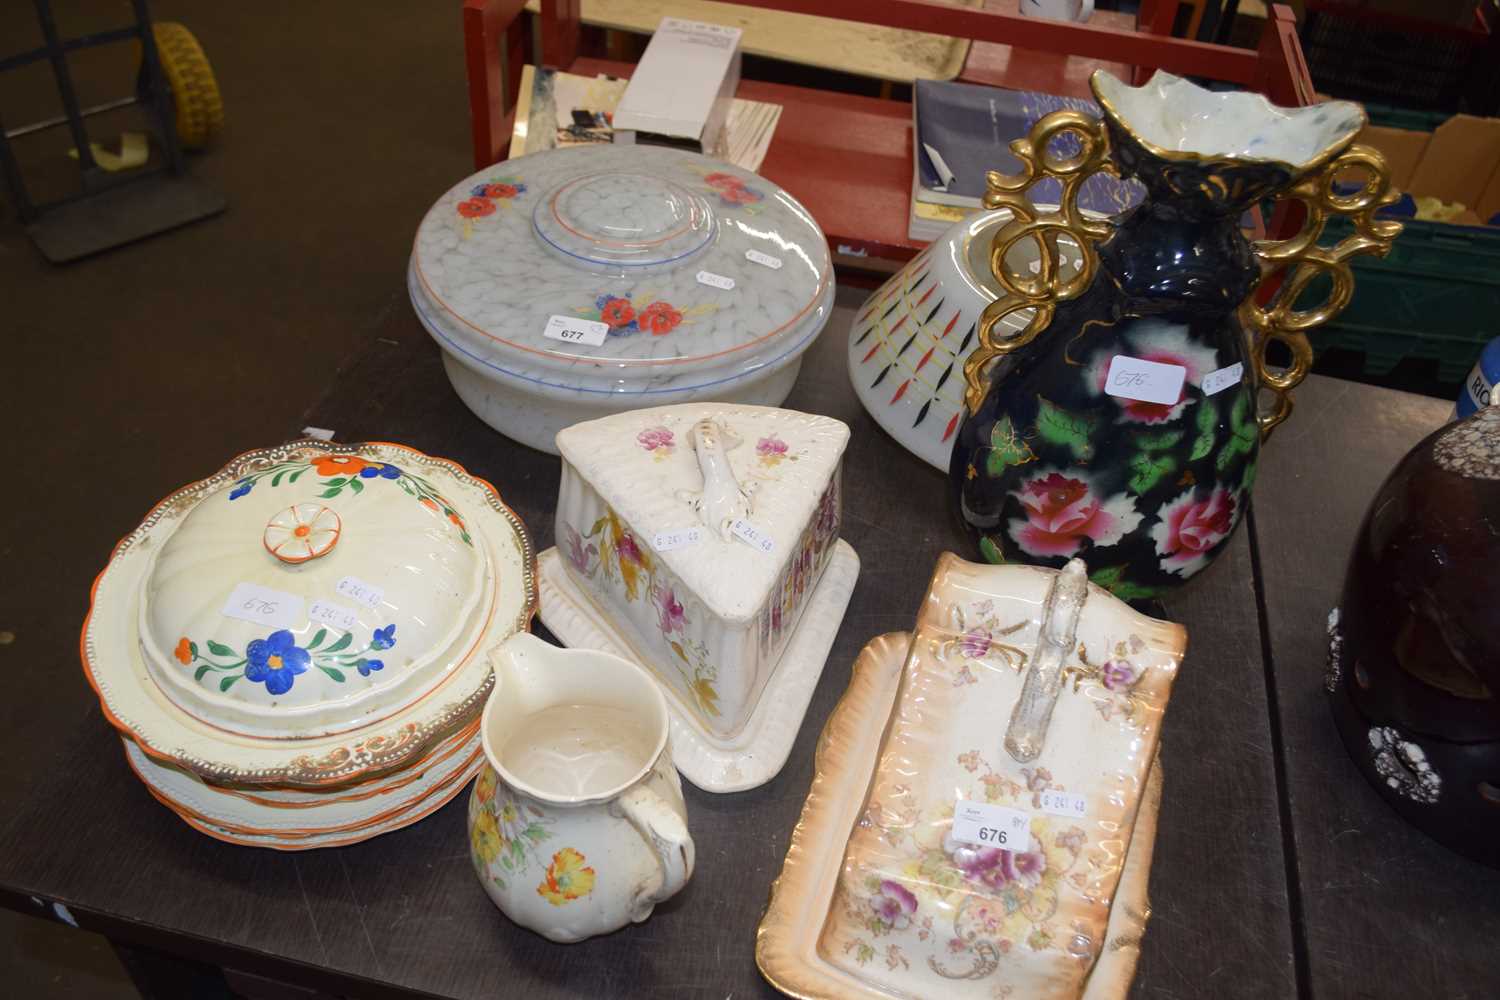 CHEESE DISHES, GILT HANDLED VASE AND VARIOUS OTHER CERAMICS